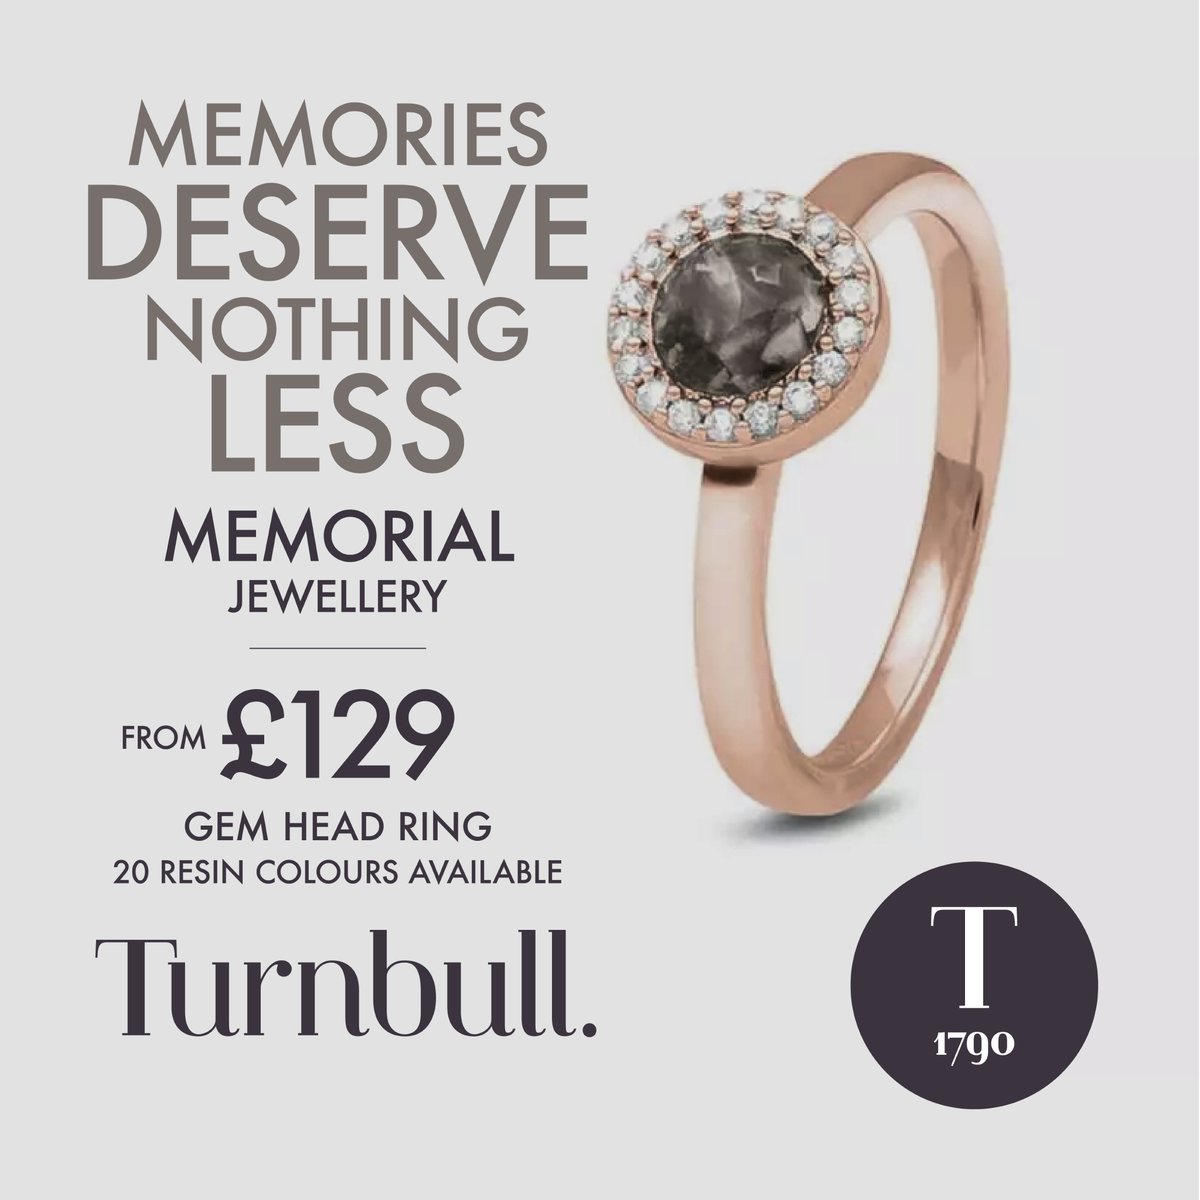 #MemorialJewellery - Gem Head #Ring. We offer a unique way to remember your #lovedones. We turn ashes into #jewellery which makes it possible to carry your loved ones with you always.
-
Turnbull.
Serving our community since 1790
-
Visit - bit.ly/3BO6ag9